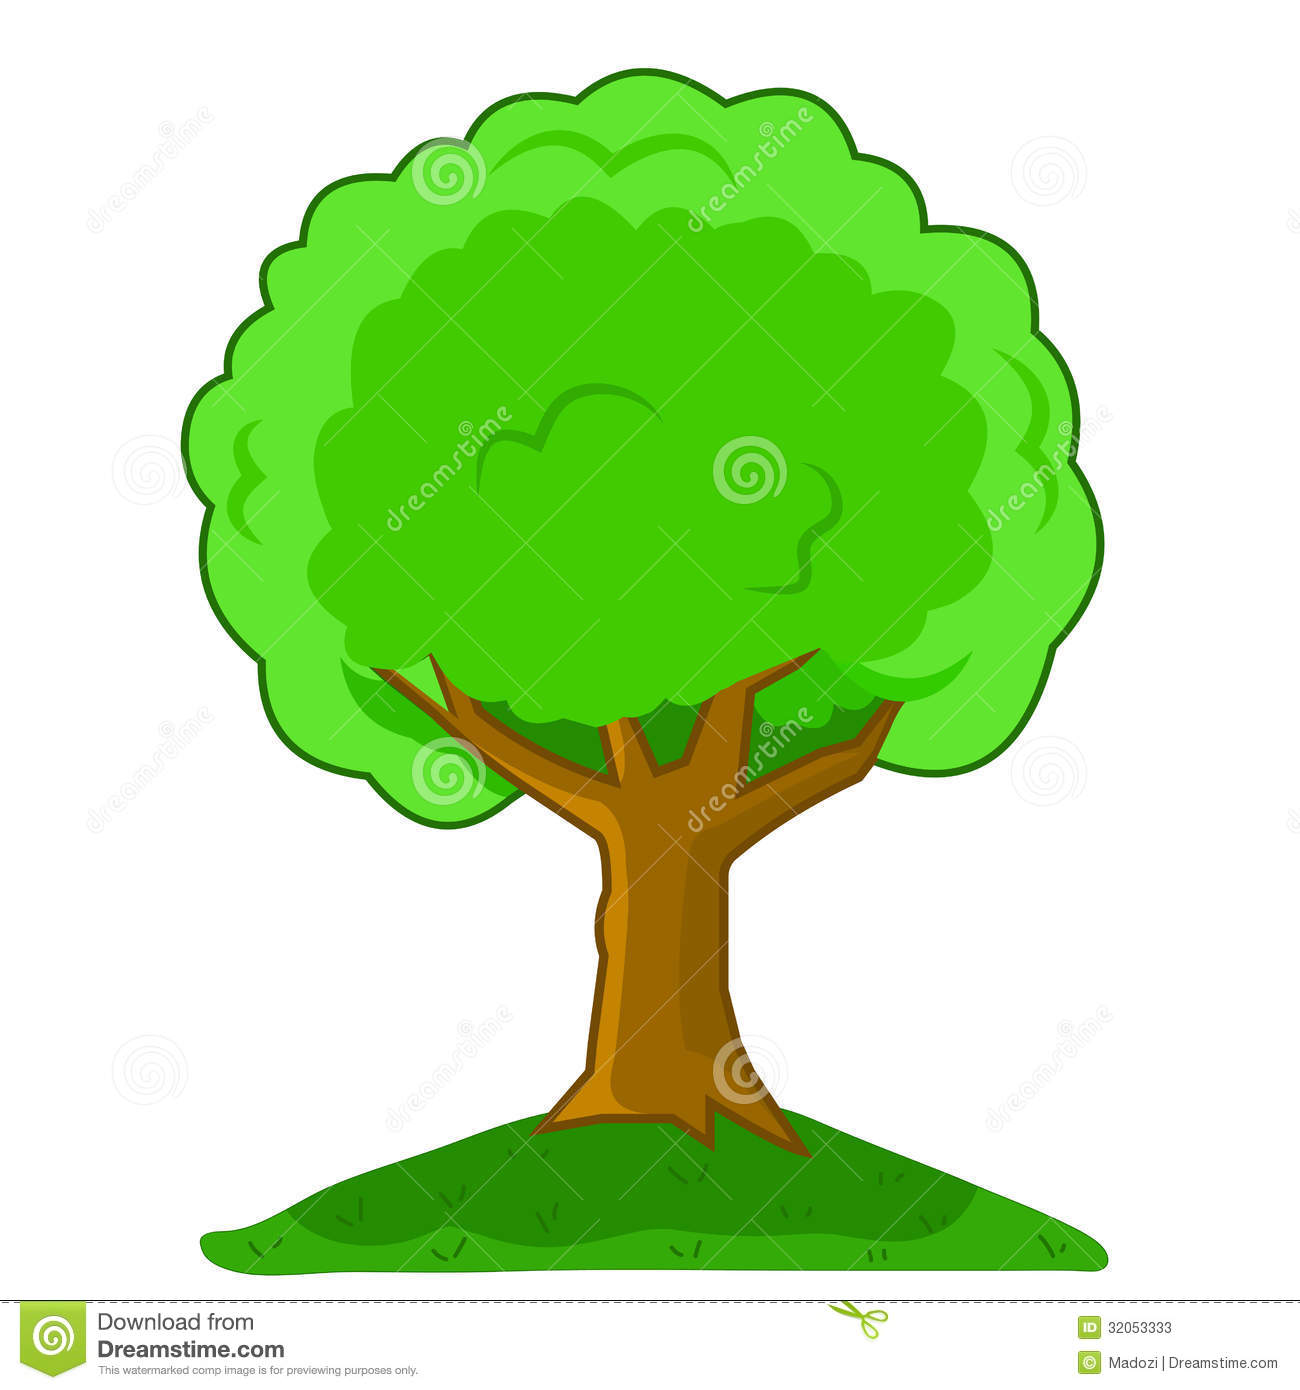 Cartoon Picture of a Tree with Branches